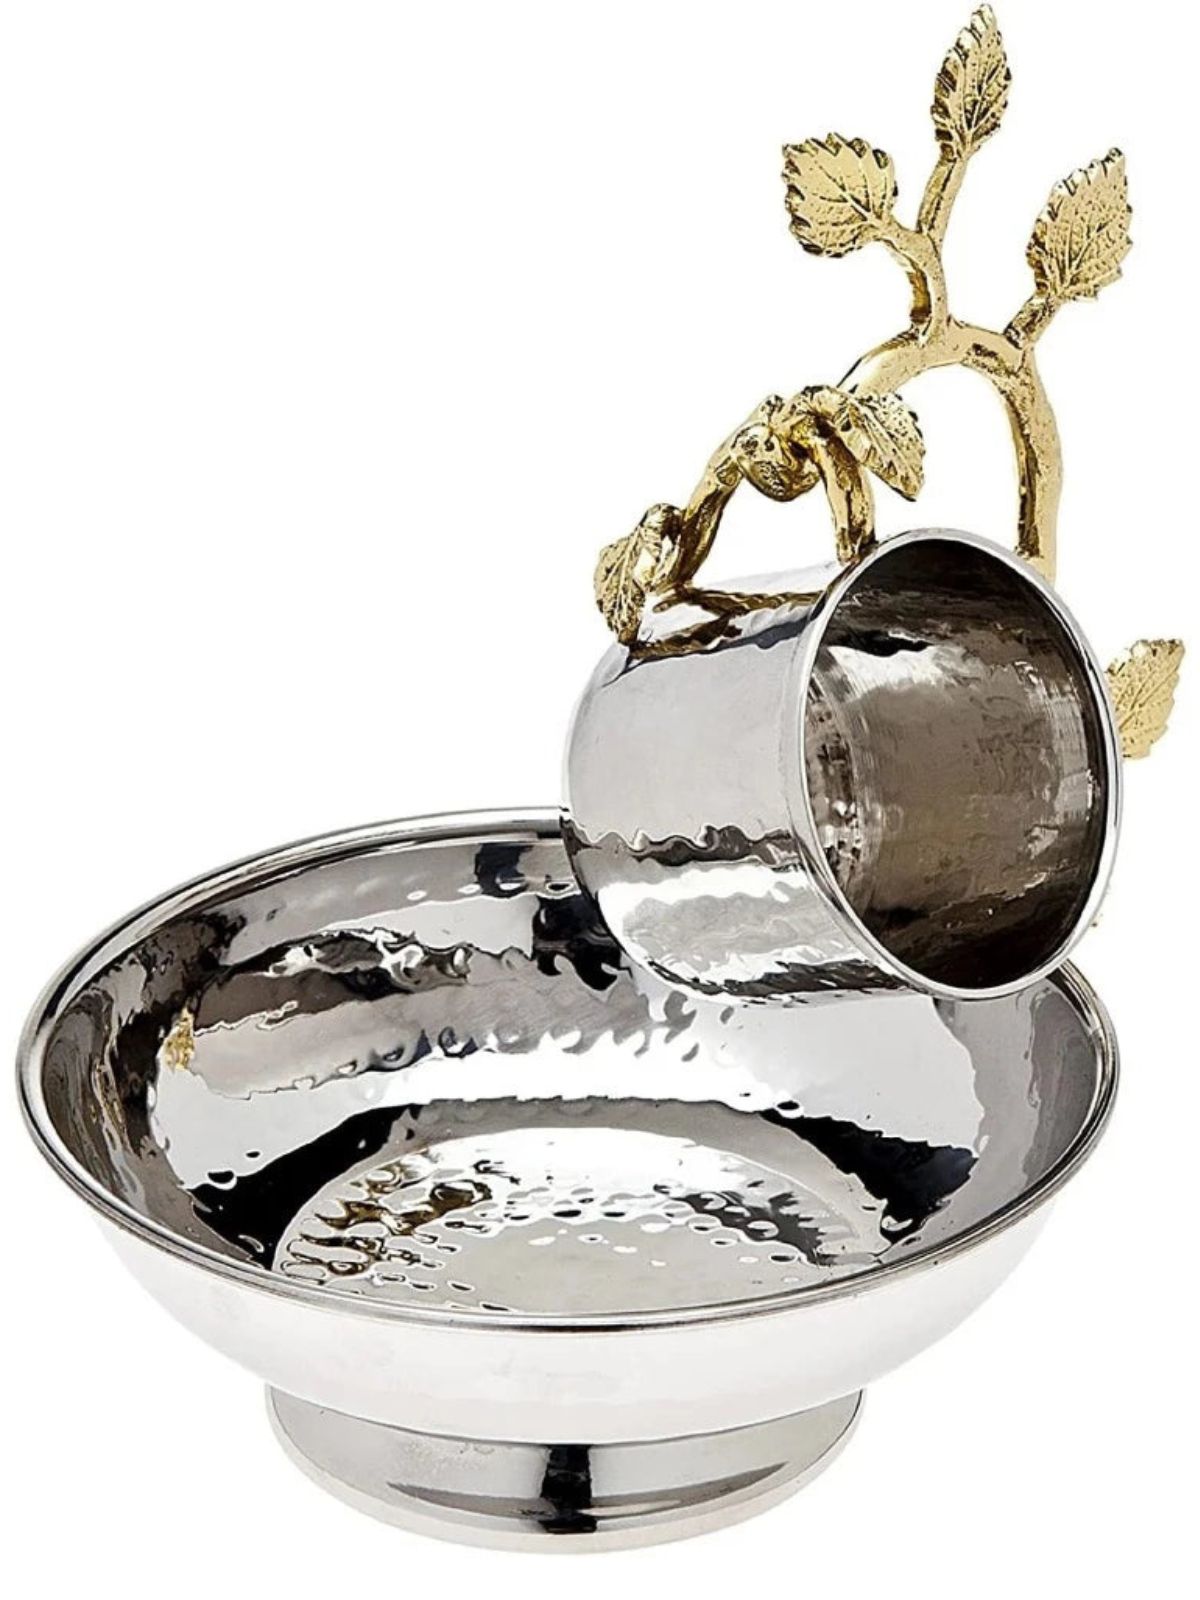 Stainless Steel Bowl with Wash Cup and Gold Brass Leaf Design sold by KYA Home Decor, Measures 6.25D x 5H.